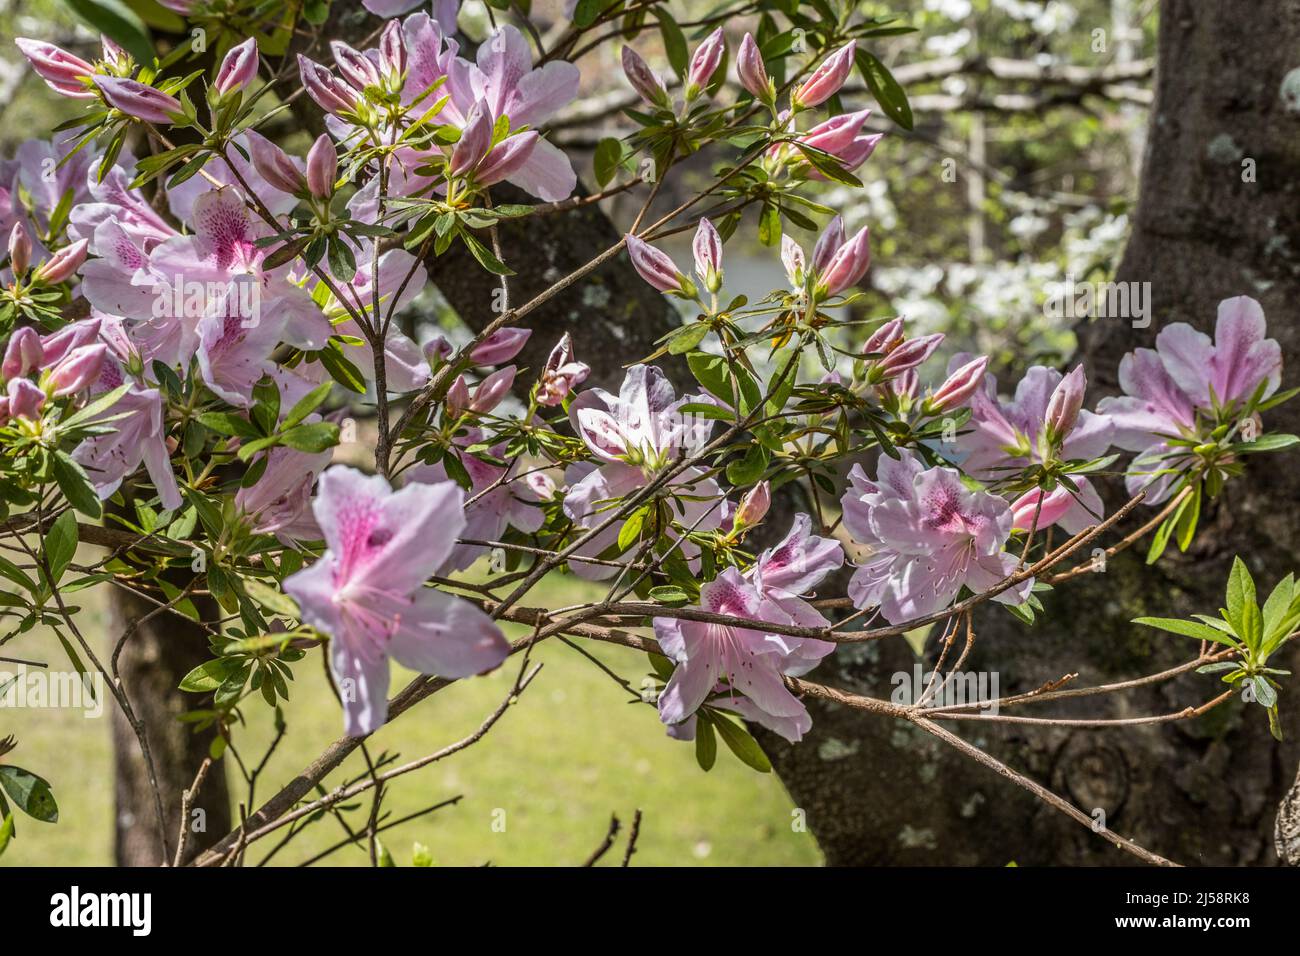 Large pink azalea flowers just starting to open with several buds ready to blossom closeup view with other trees in the background on a sunny day in s Stock Photo